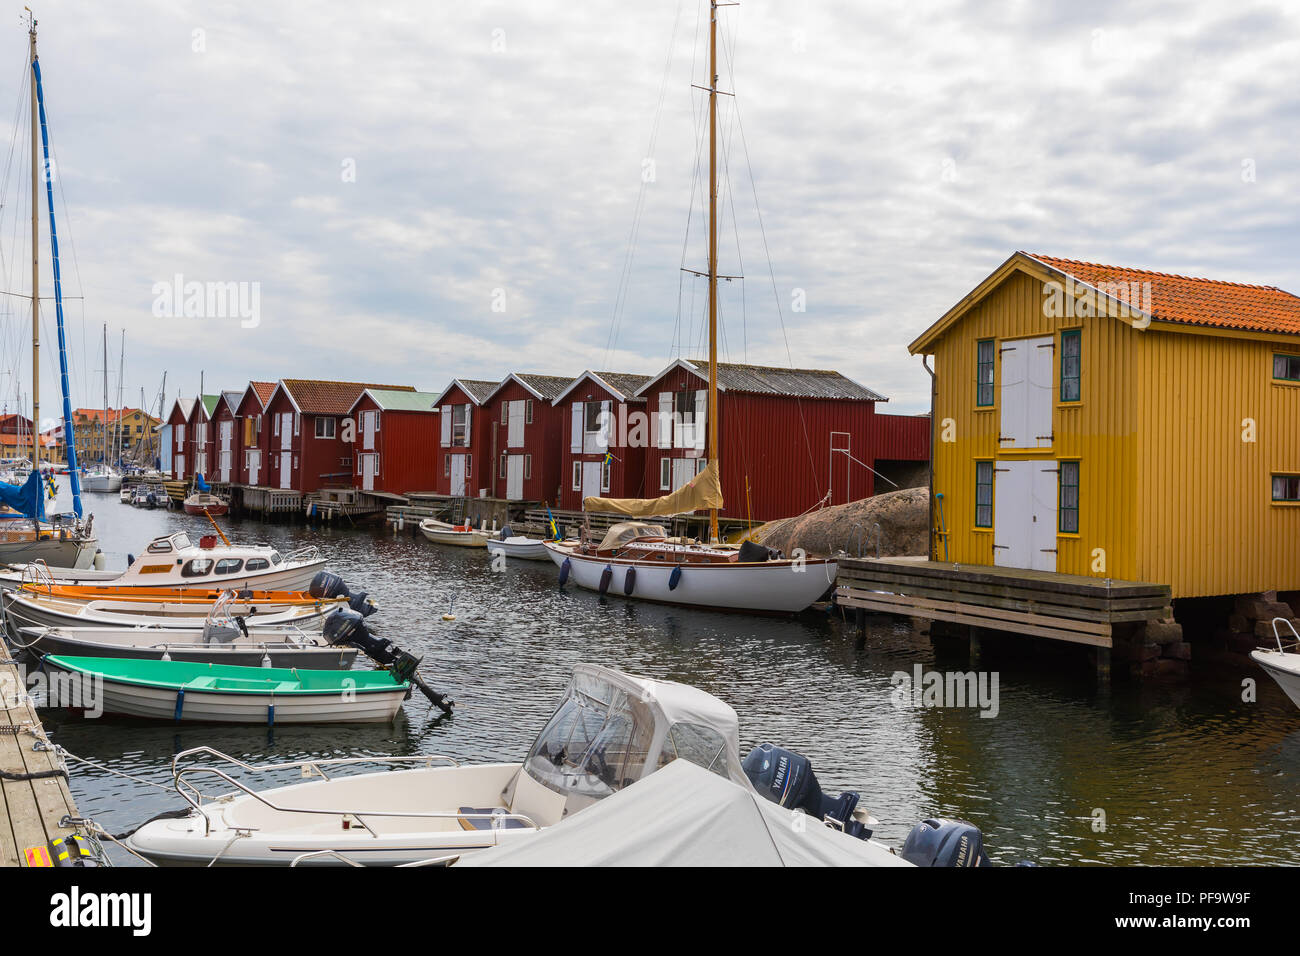 Smögen is a locality situated in Västra Götaland County, Sweden. It is one of the liveliest 'summer towns' of the Swedish west coast. Stock Photo